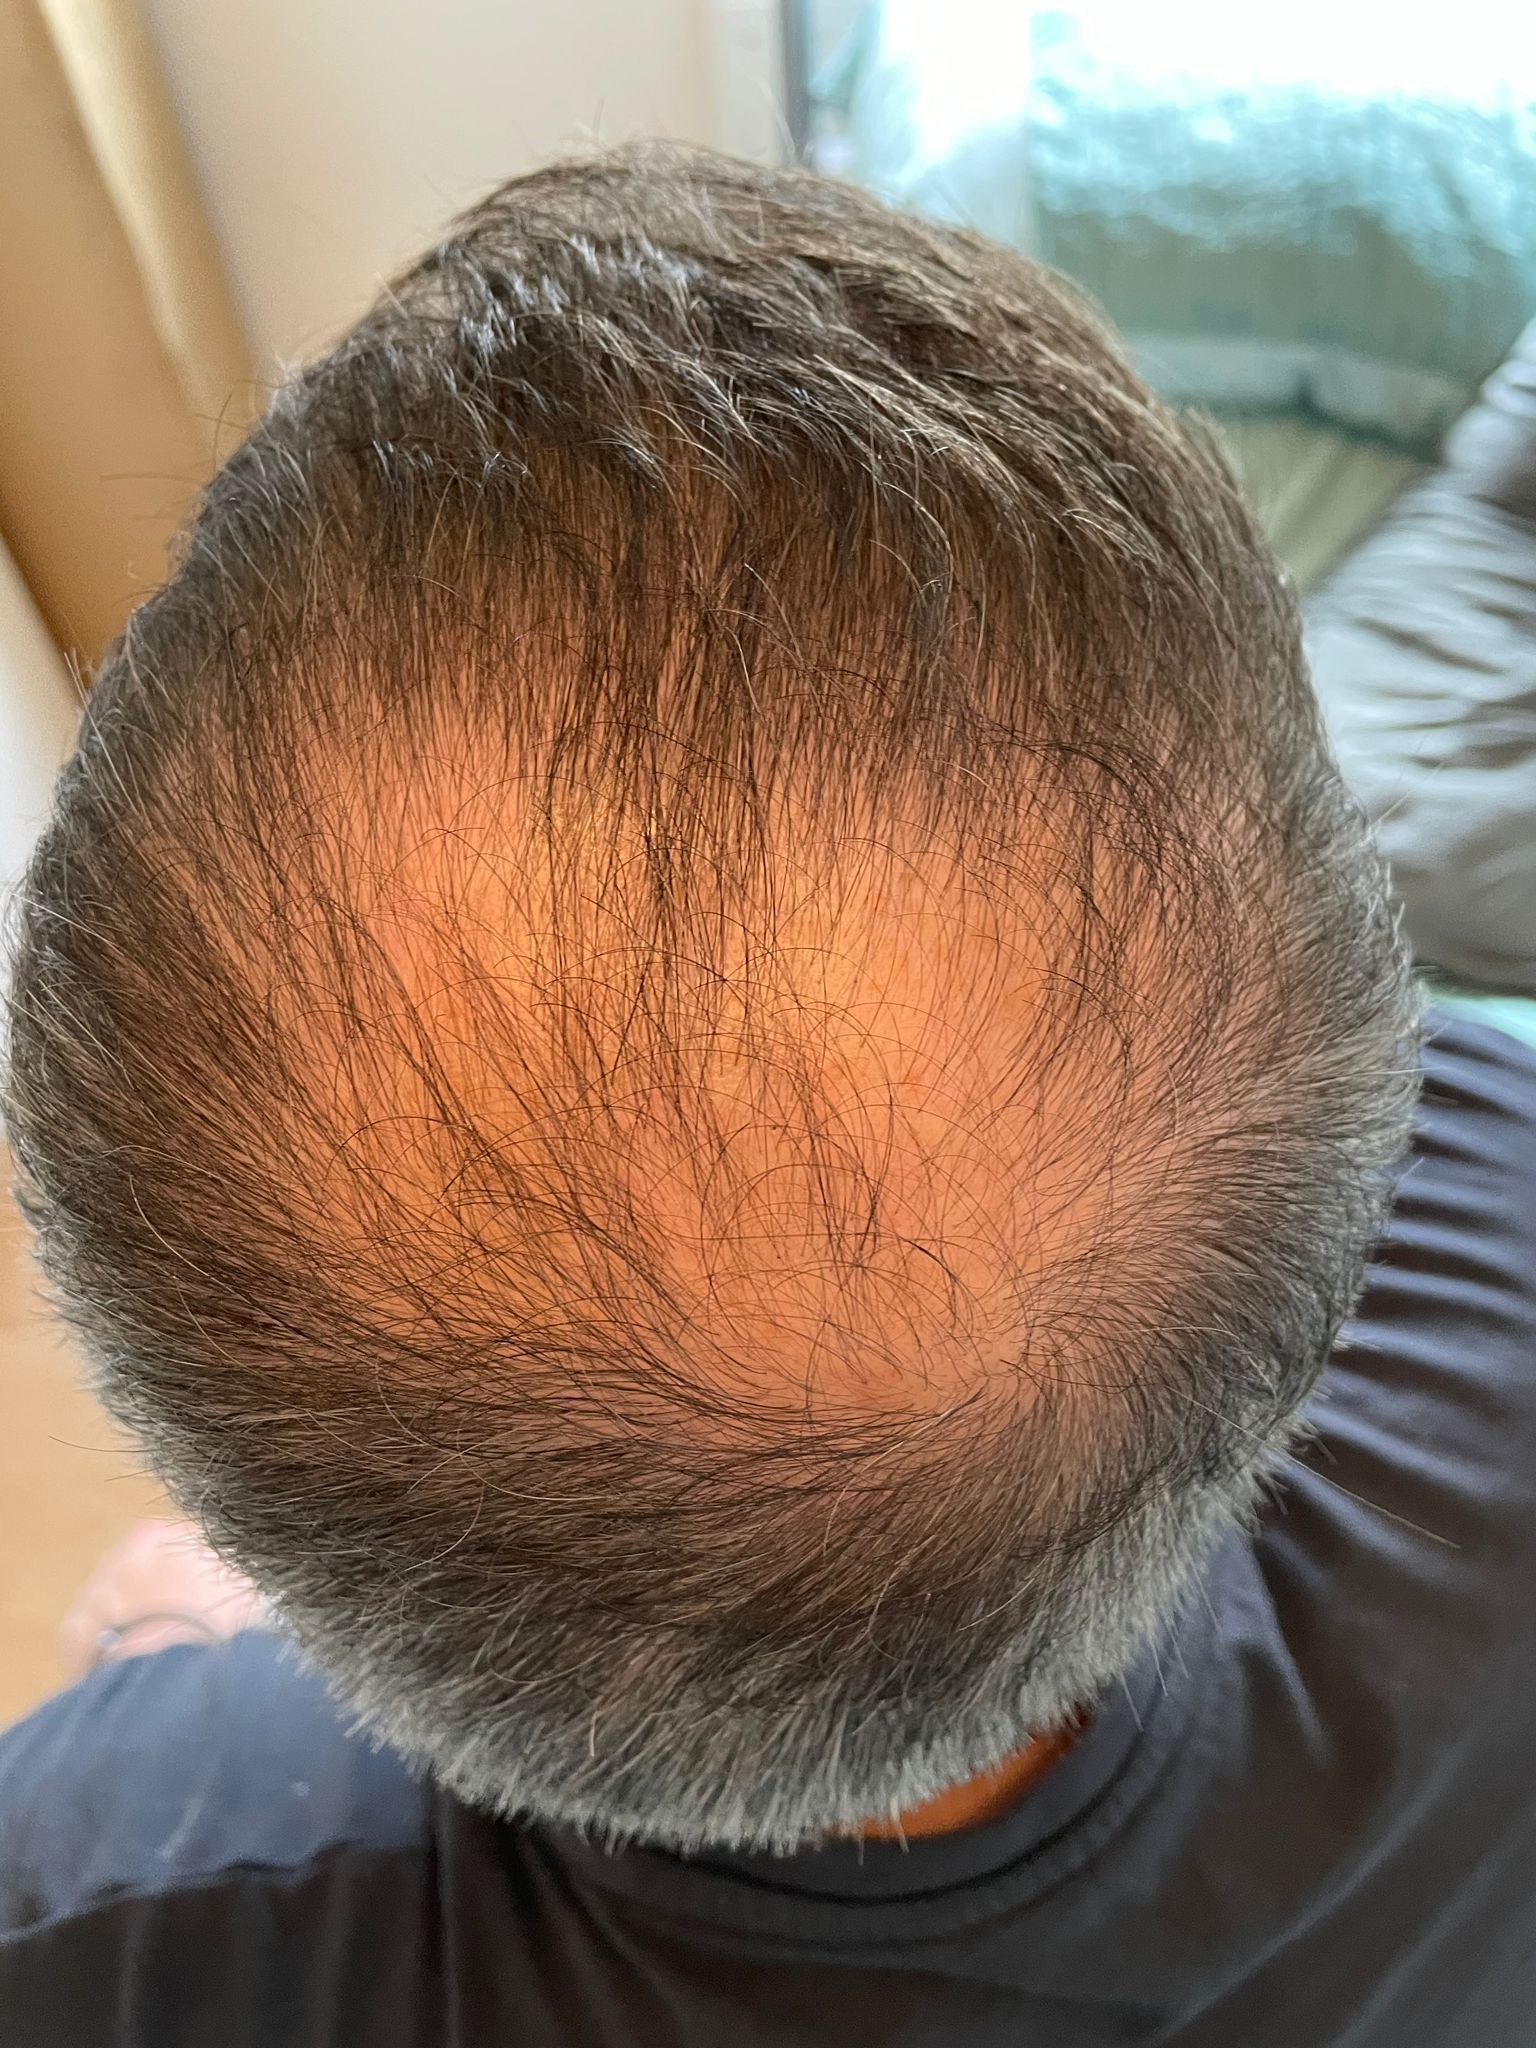 A picture of a male with male pattern baldness around the crown area